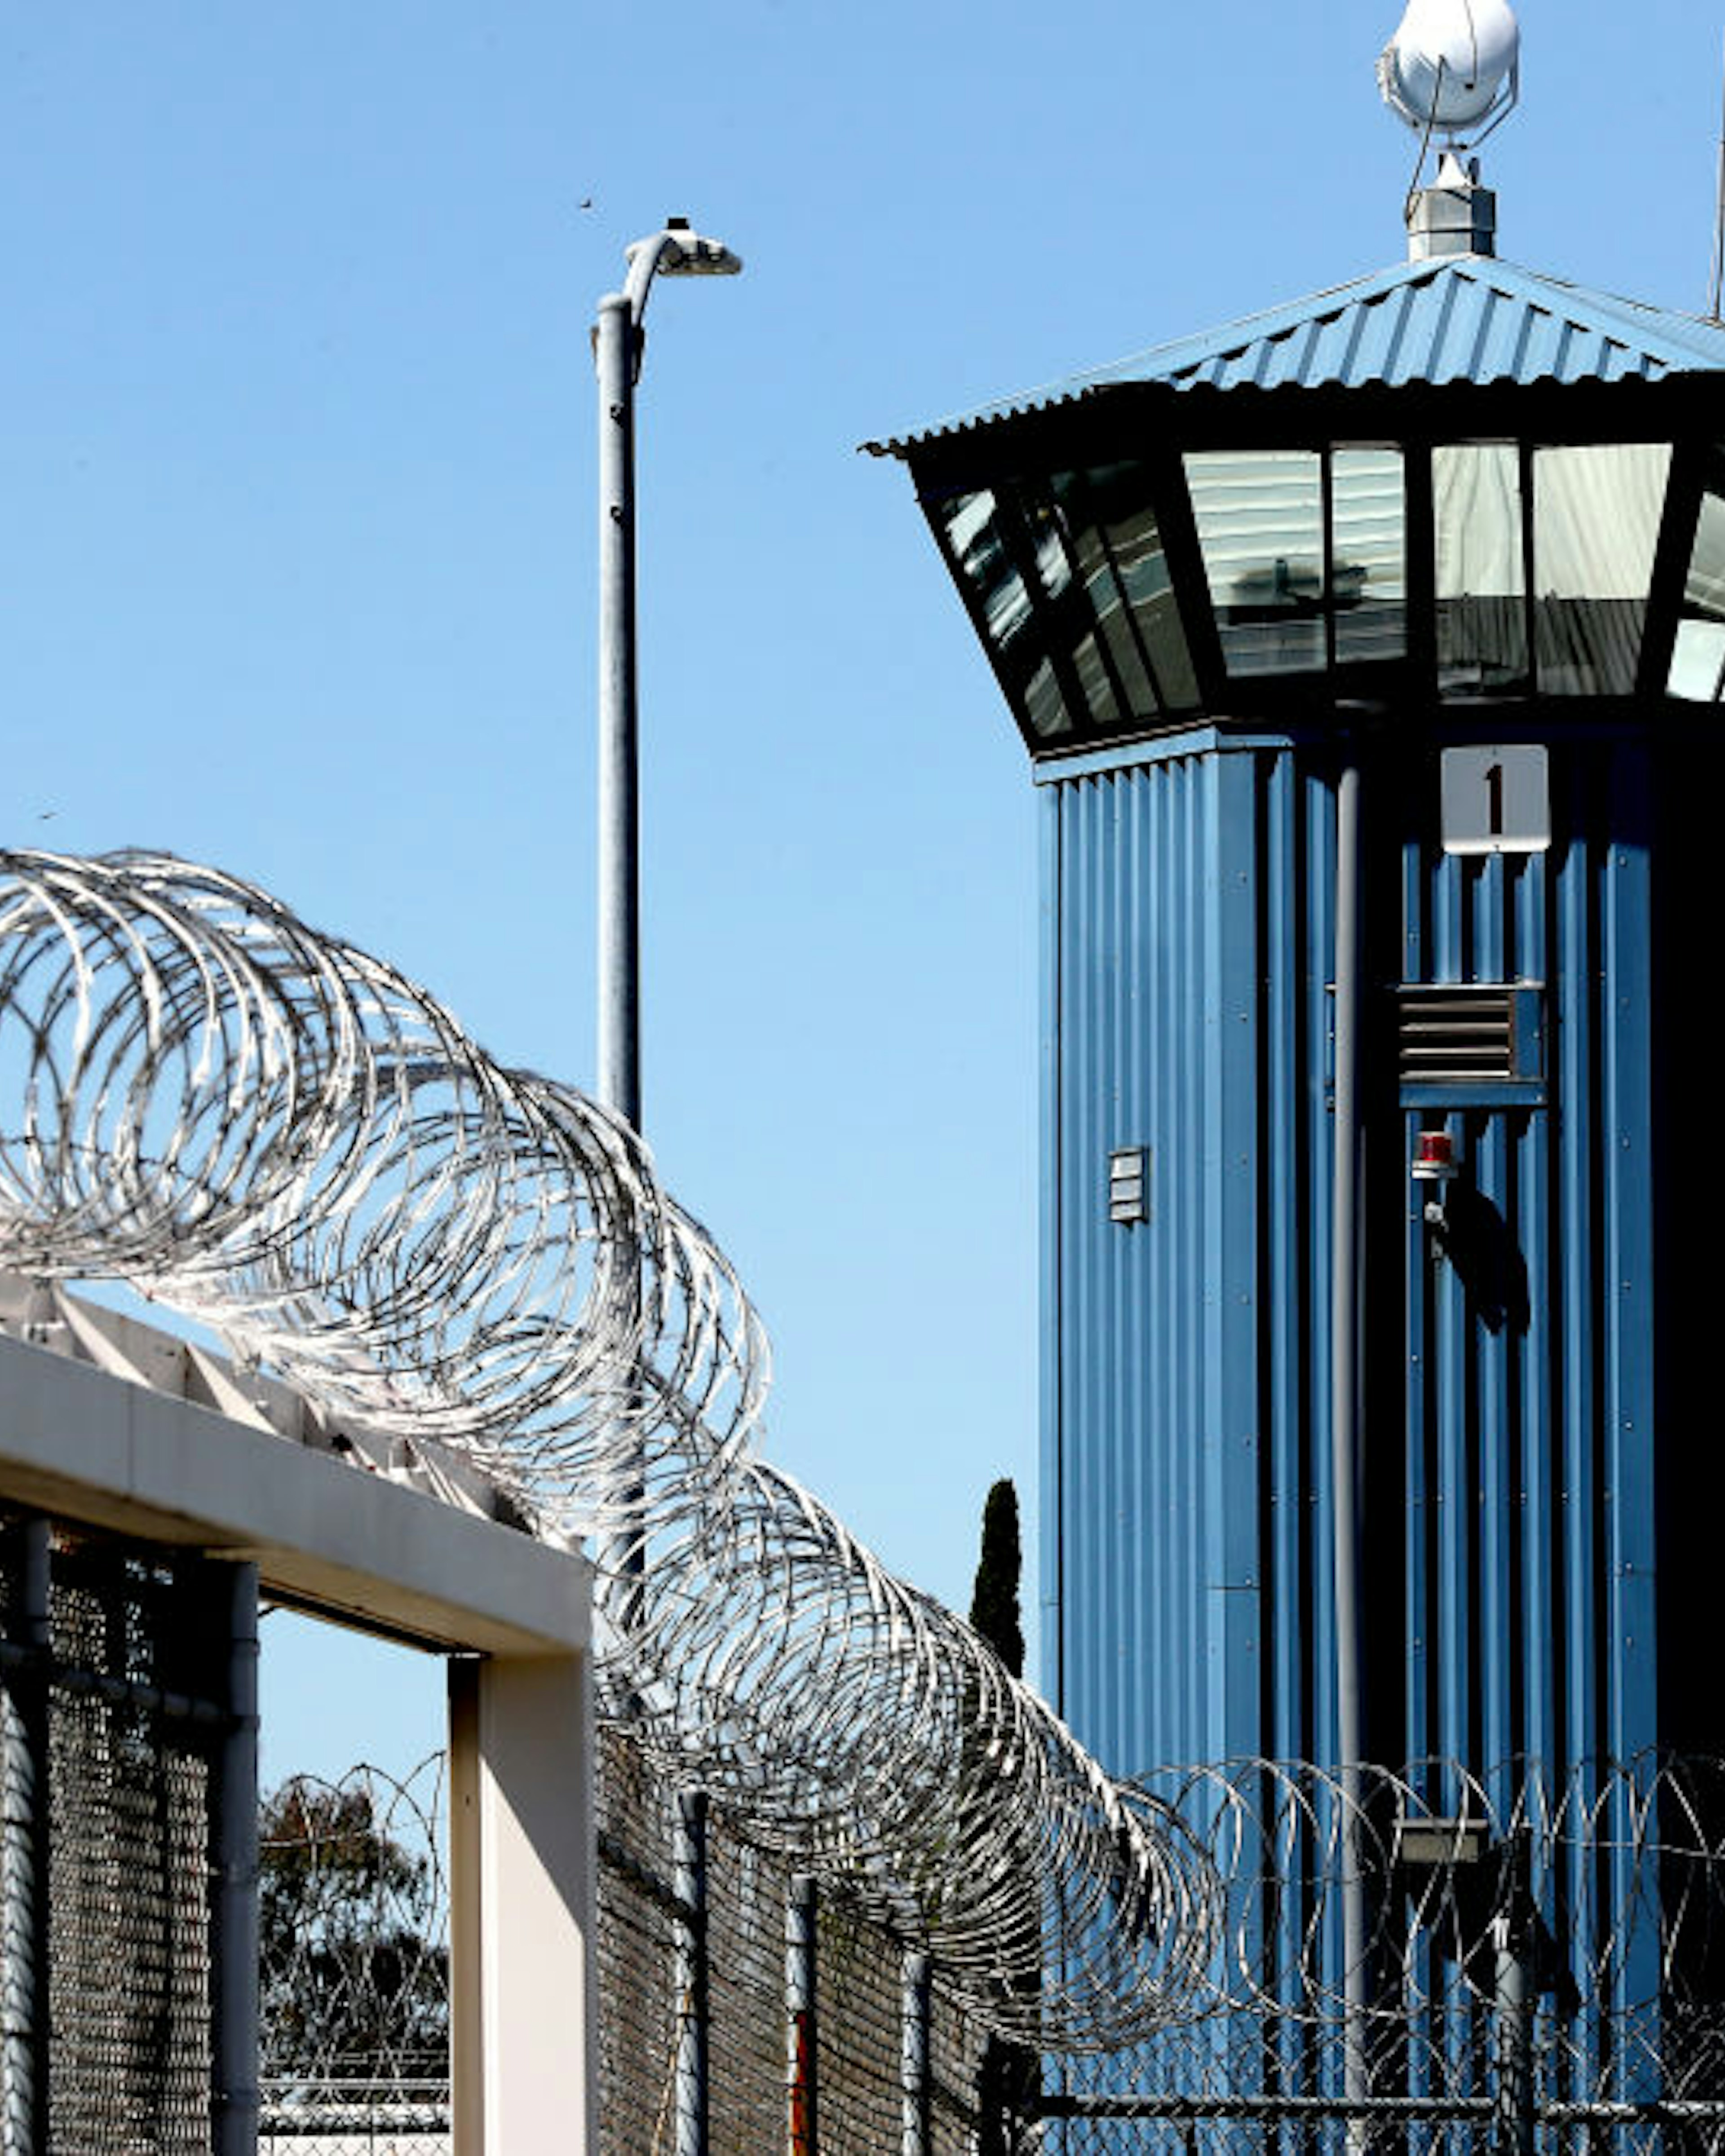 Represa CA - April 13: Razor wire tops a fence near the Short-Term Restricted Housing Unit at California State Prison, Sacramento. The unit is for prisoners in segregated or solitary confinement. The California legisature is considering another bill (AB 280) to restrict solitary confinement after a similar proposal died last year. (Luis Sinco / Los Angeles Times via Getty Images)